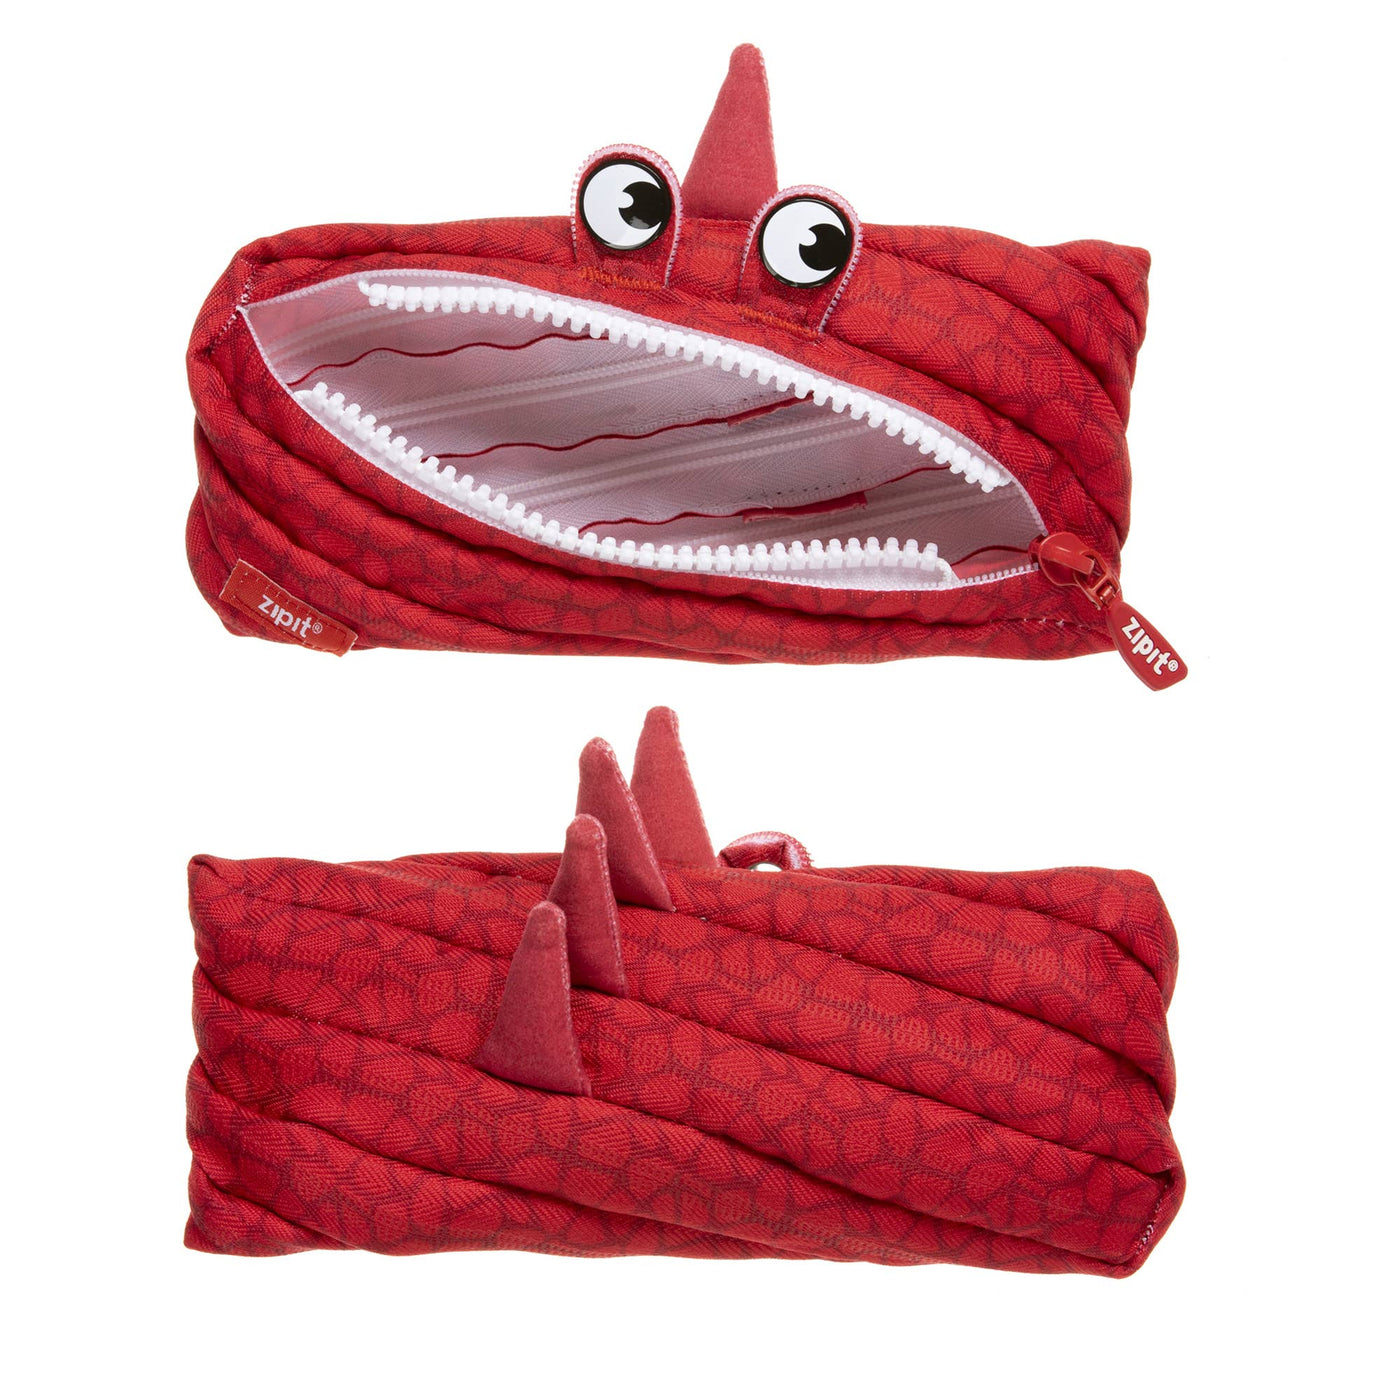 ZIPIT Dino Pencil Case, Red